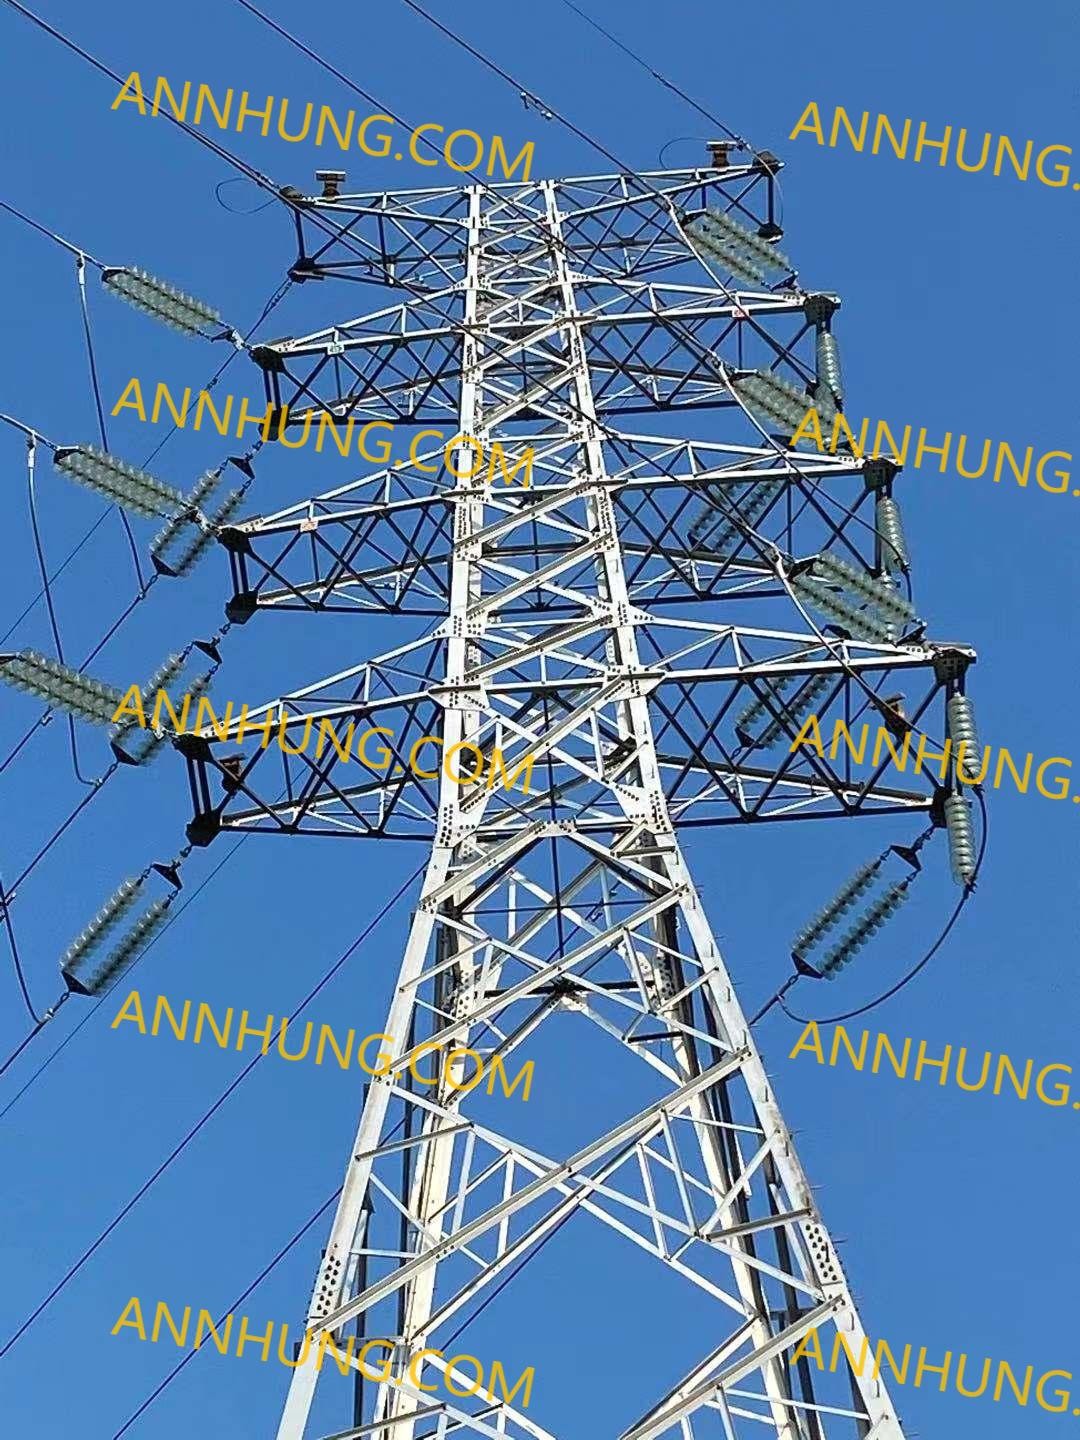 Latest company case about Xinbaiguang XBZH-1 standard 110kV and above transmission line relocation project, Solar Medium-intensity Aircraft Warning Light